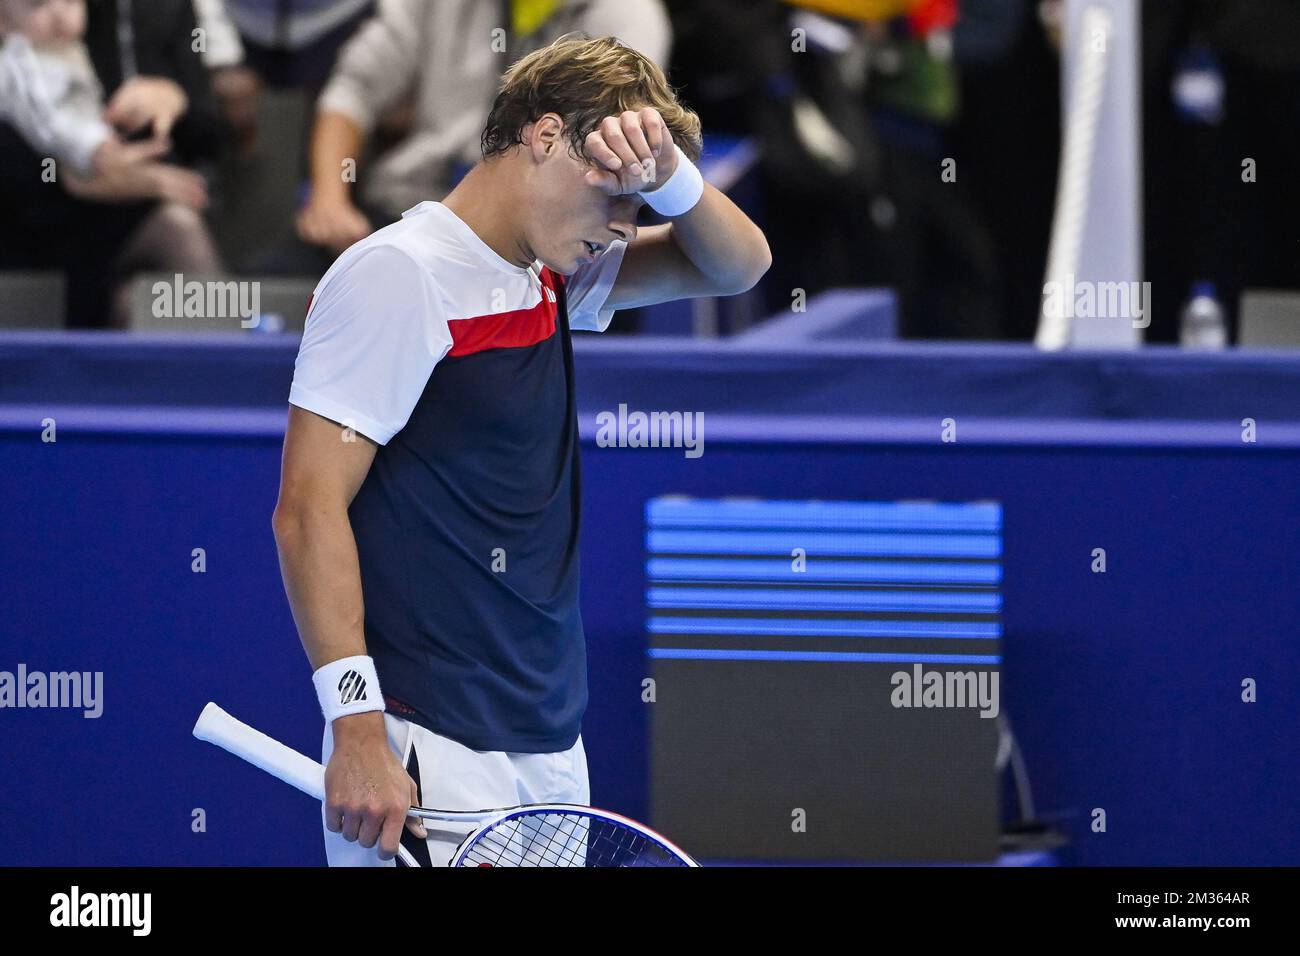 Belgian Michael Geerts looks dejected during a match between American Brooksby and Belgian Geerts, in the qualifications for the European Open Tennis ATP tournament, in Antwerp, Sunday 17 October 2021